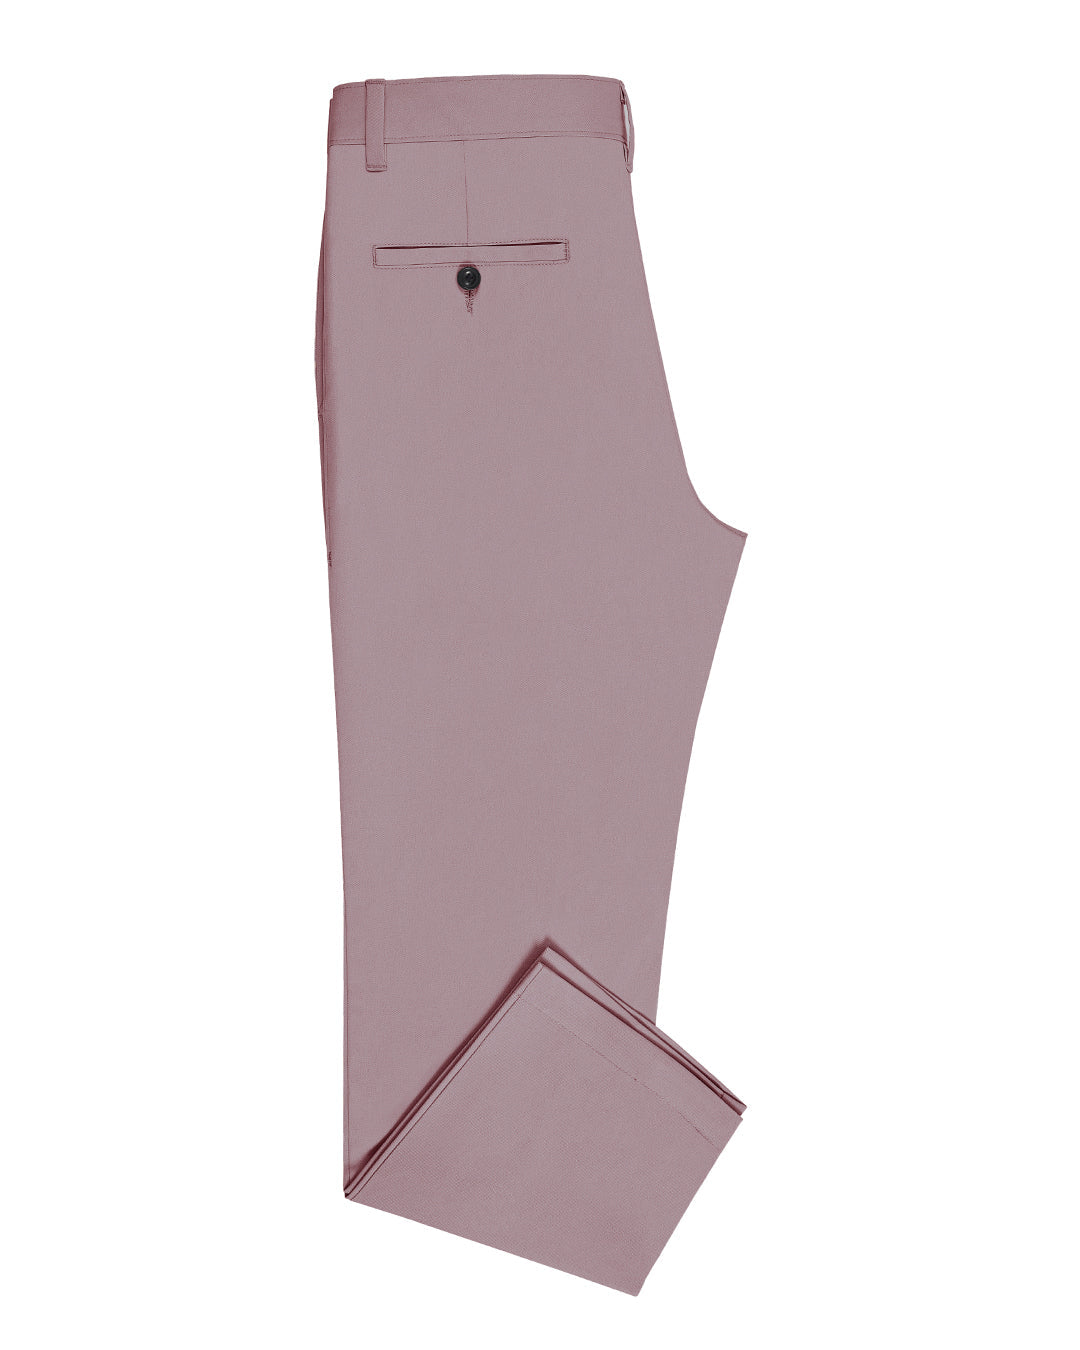 Side view of custom Genoa Chino pants for men by Luxire in purple fade